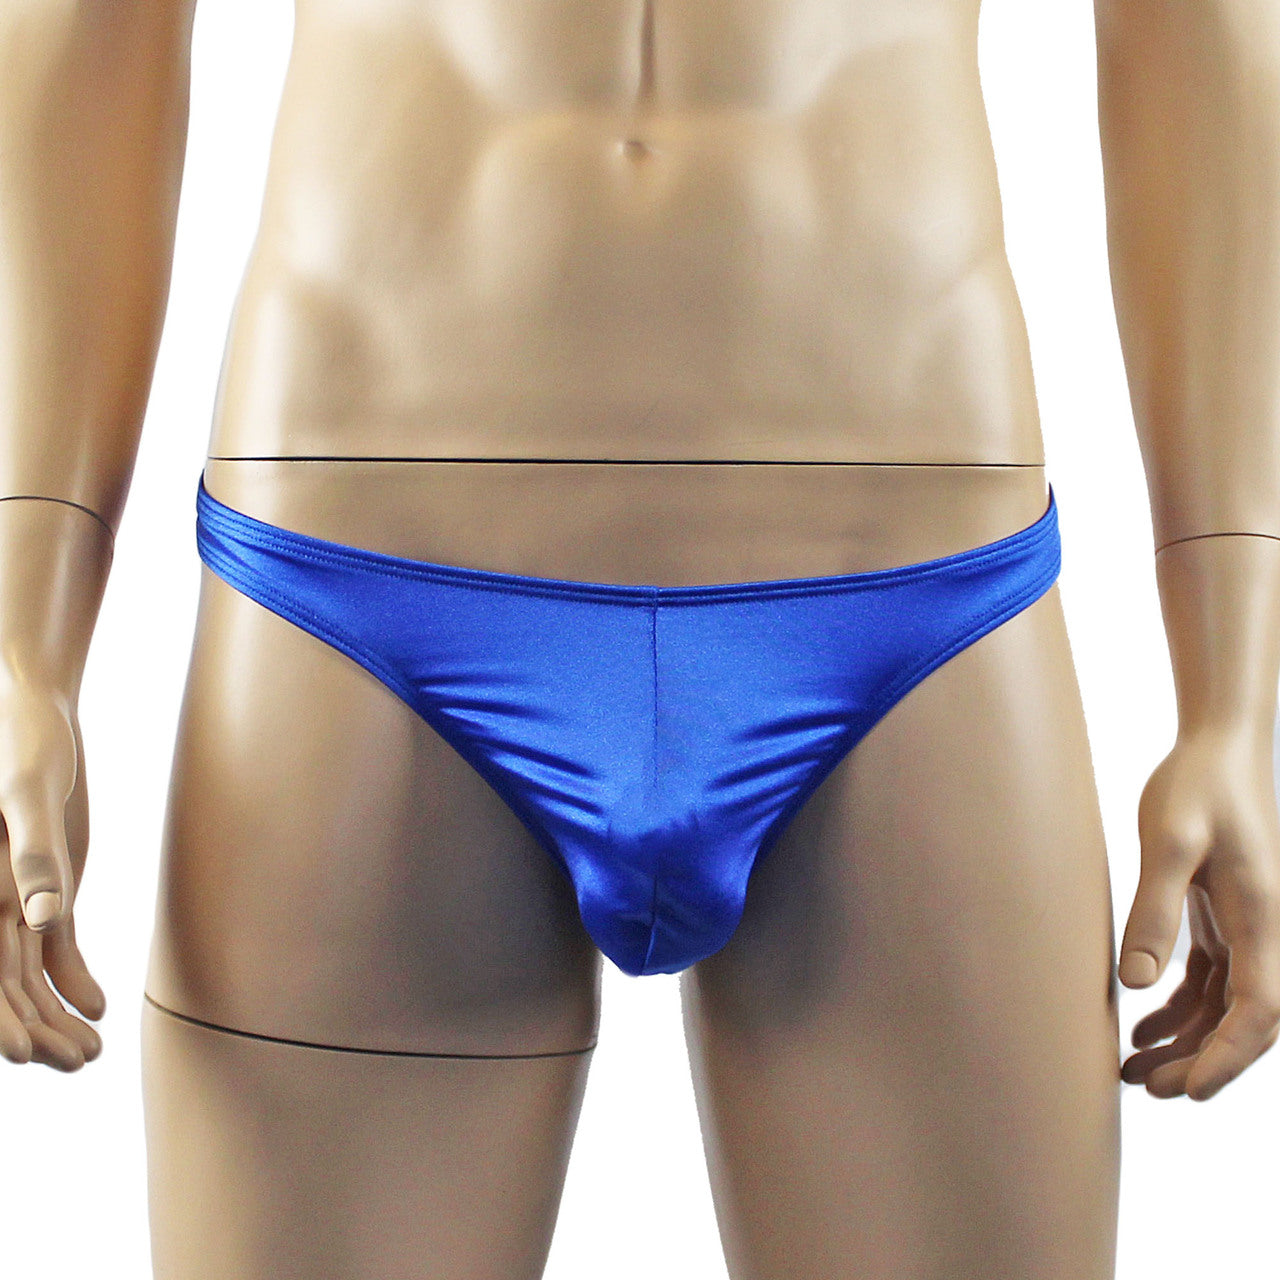 Mens Silky Satin Bra Top and Thong Lingerie (blue plus other colours)